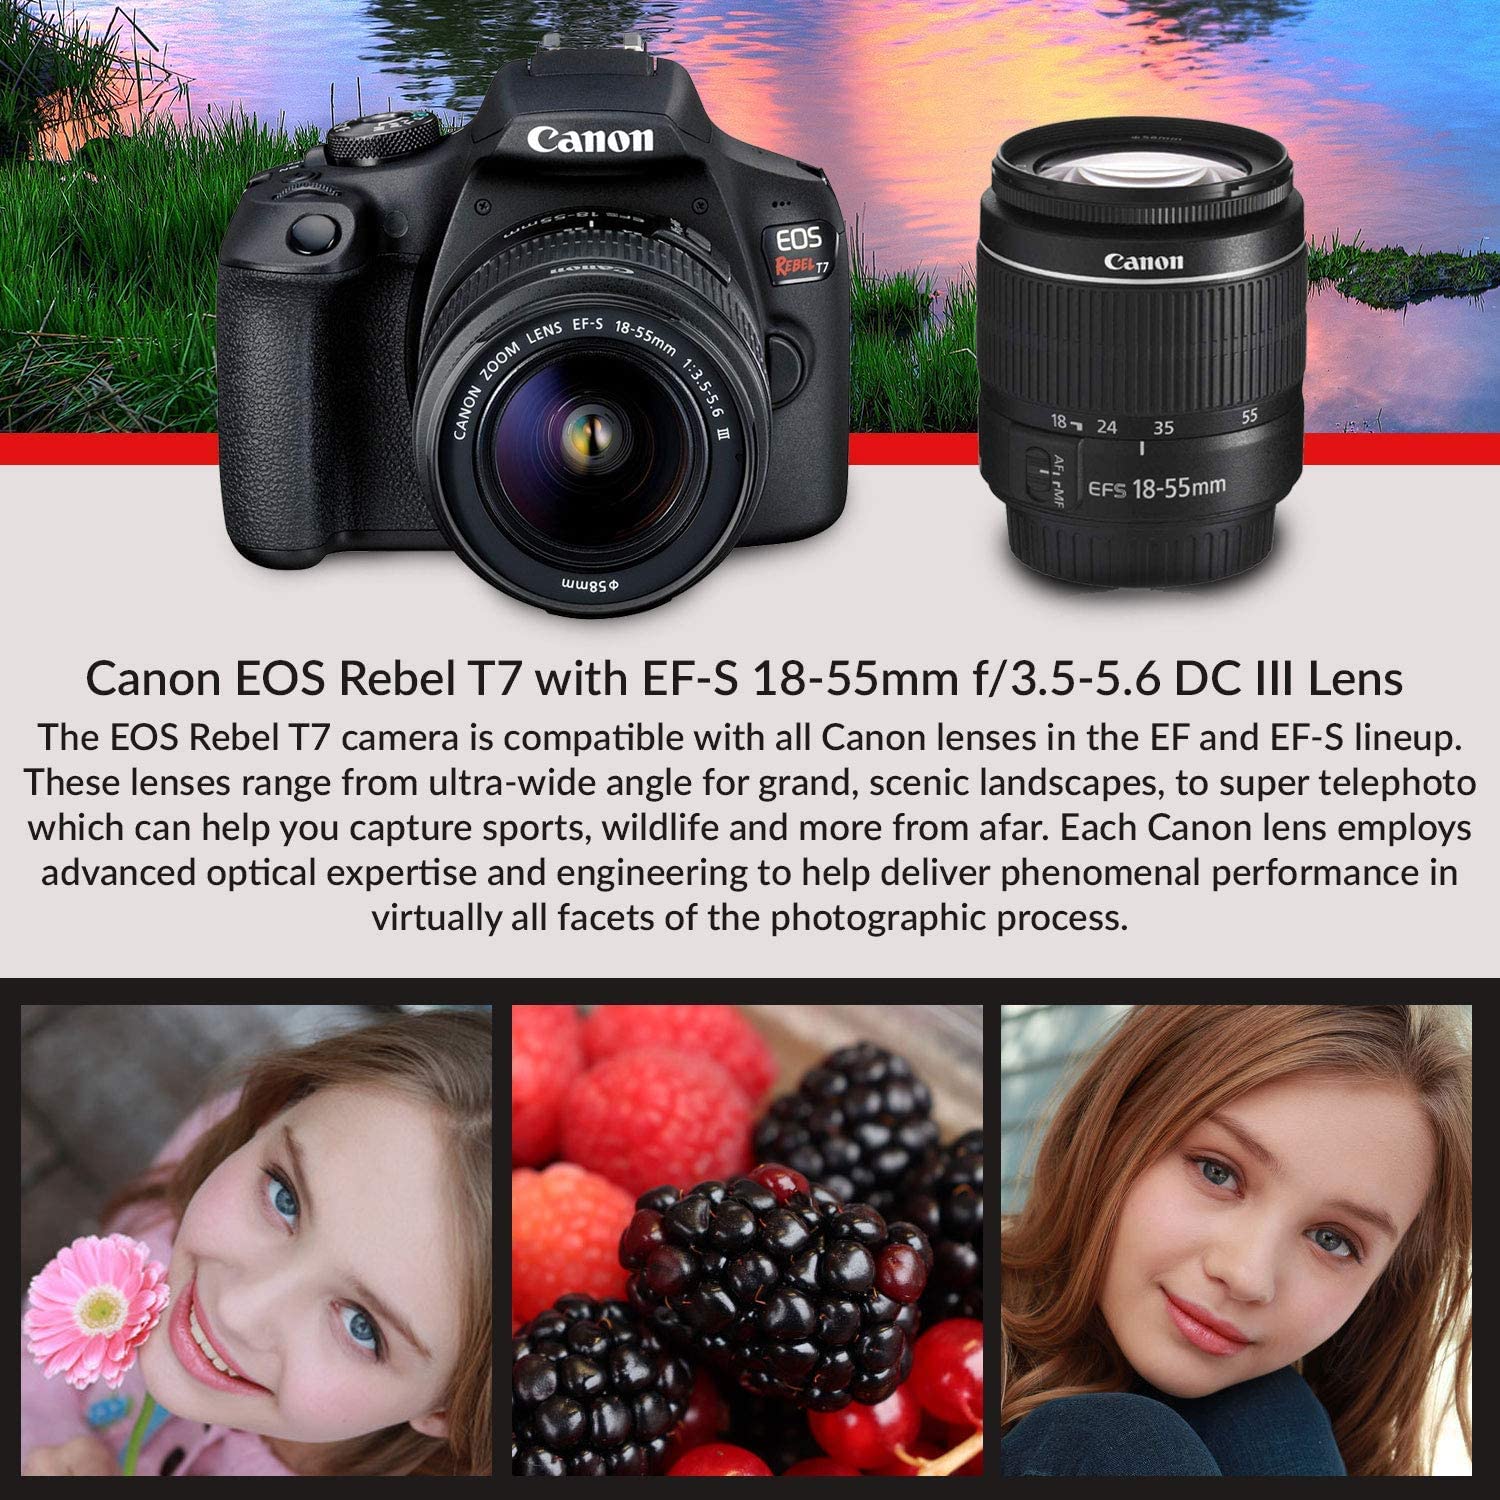 Canon EOS Rebel T7 DSLR Camera with 18-55mm Lens Starter Bundle, Includes: EOS Bag, Sandisk Ultra 64GB Card, Clean and Care Kit + More